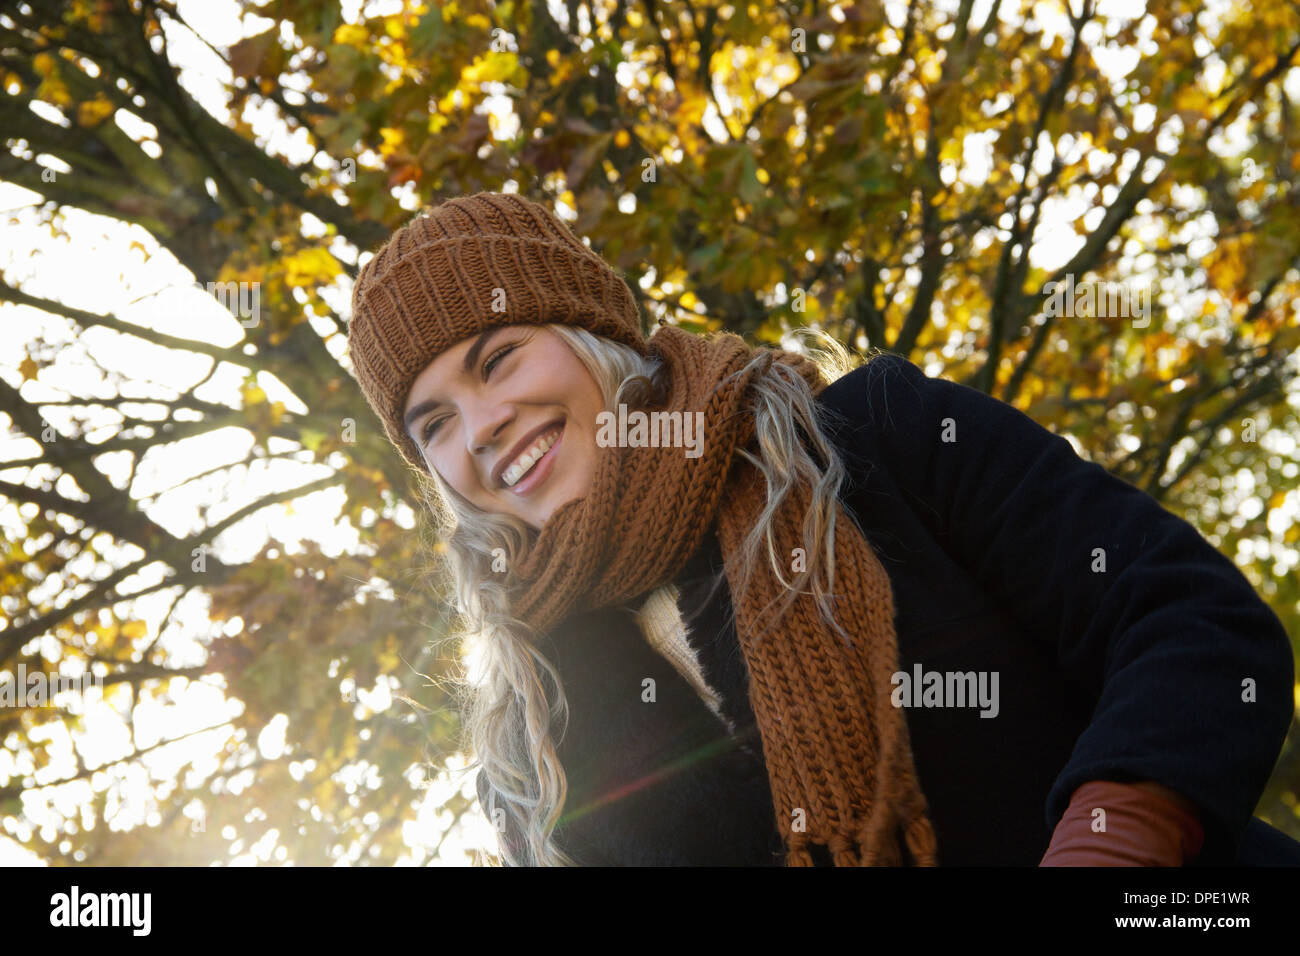 Smiling young woman wrapped up in autumnal park Stock Photo